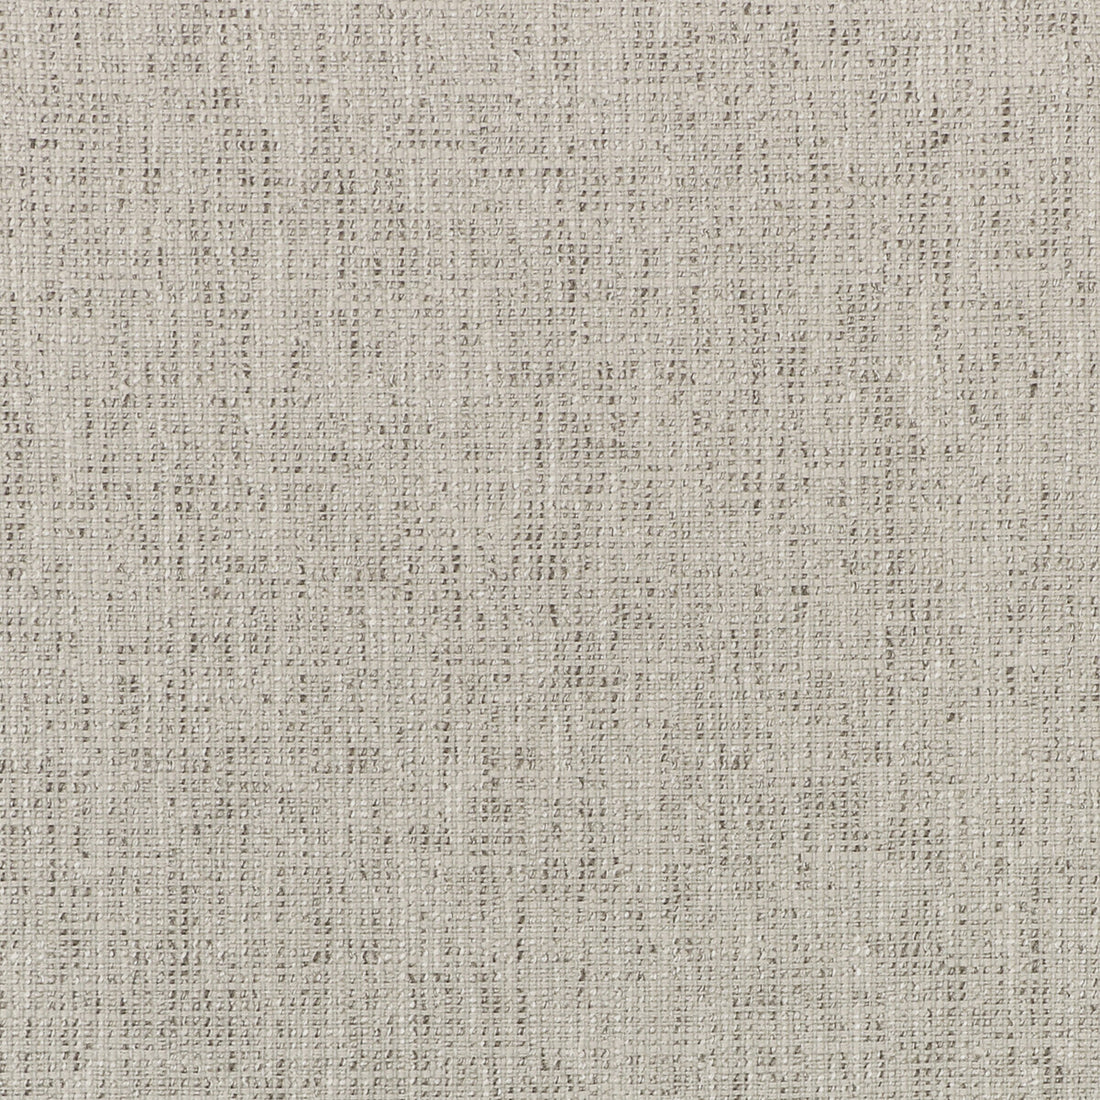 Kravet Smart fabric in 35518-11 color - pattern 35518.11.0 - by Kravet Smart in the Inside Out Performance Fabrics collection